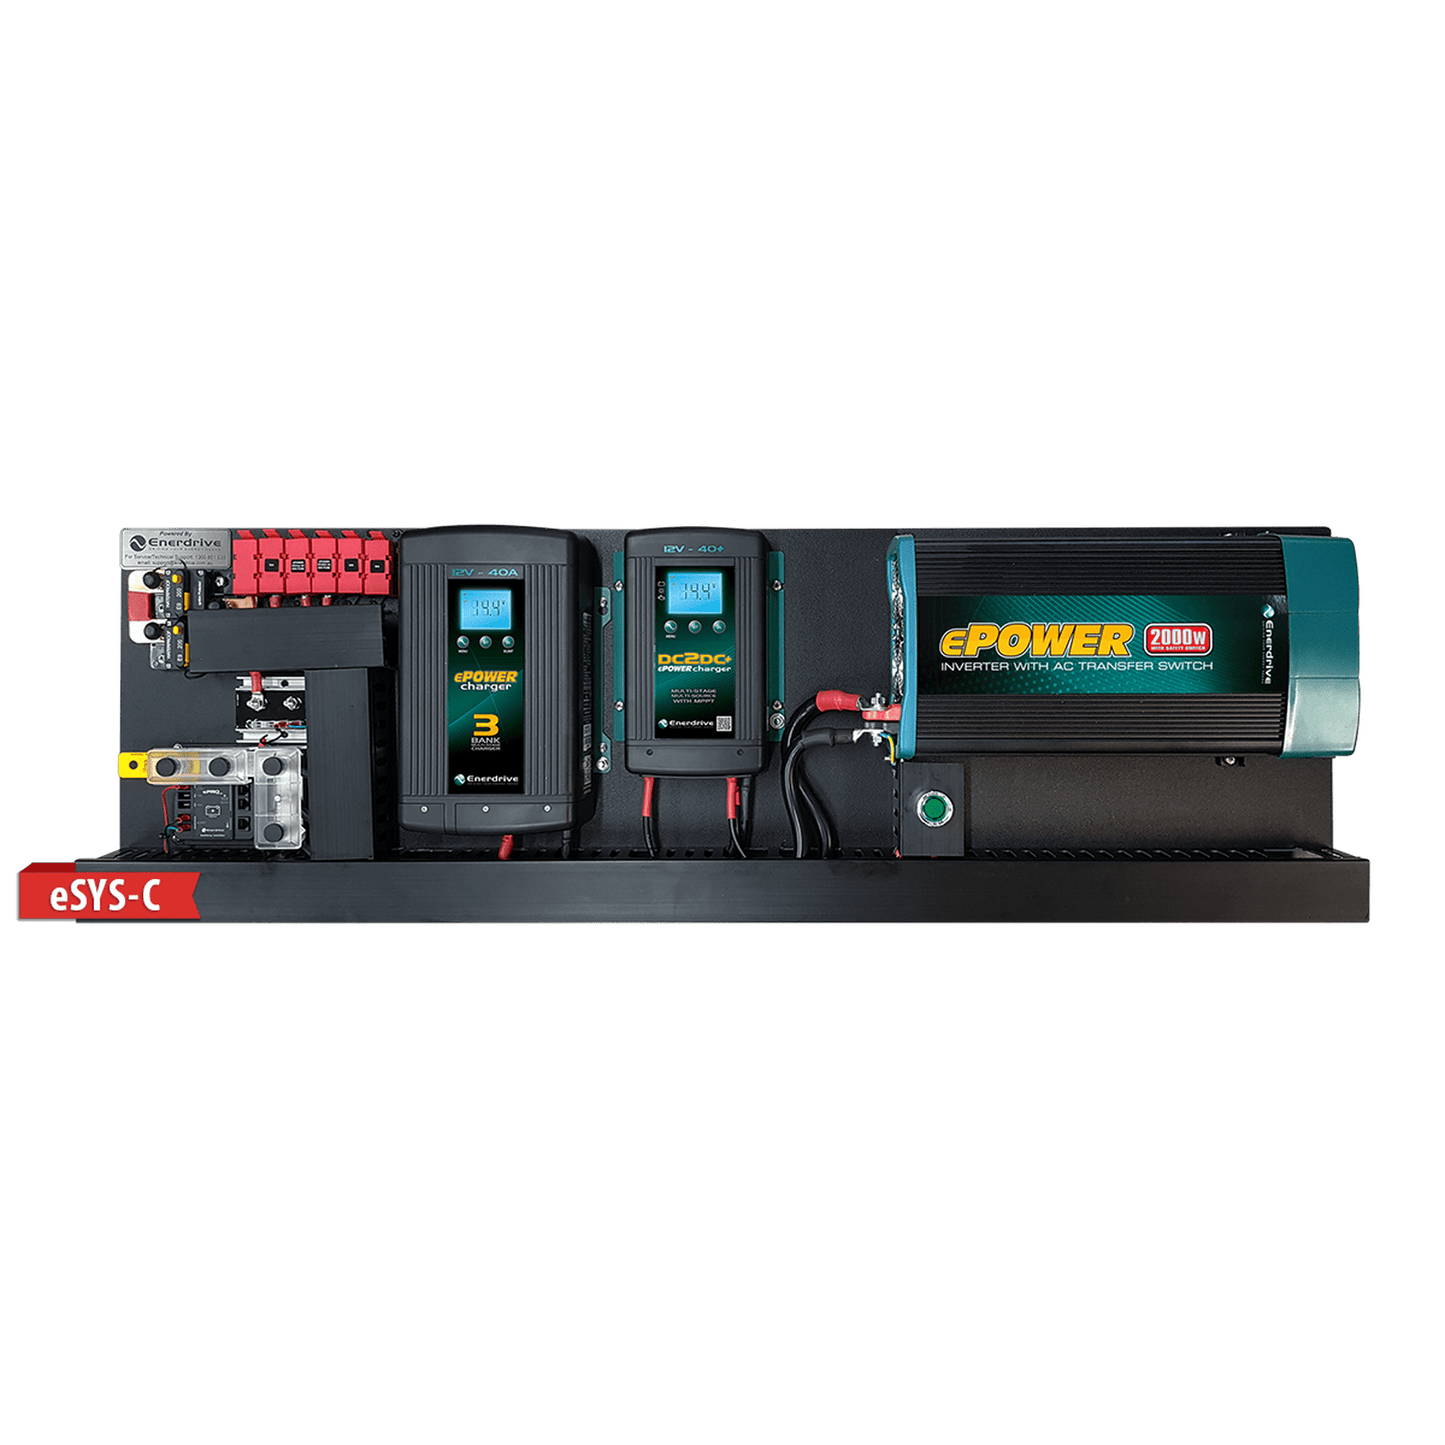 Enerdrive eSYSTEM-K 40A AC / DC with Simarine Battery Monitor & 45A MPPT